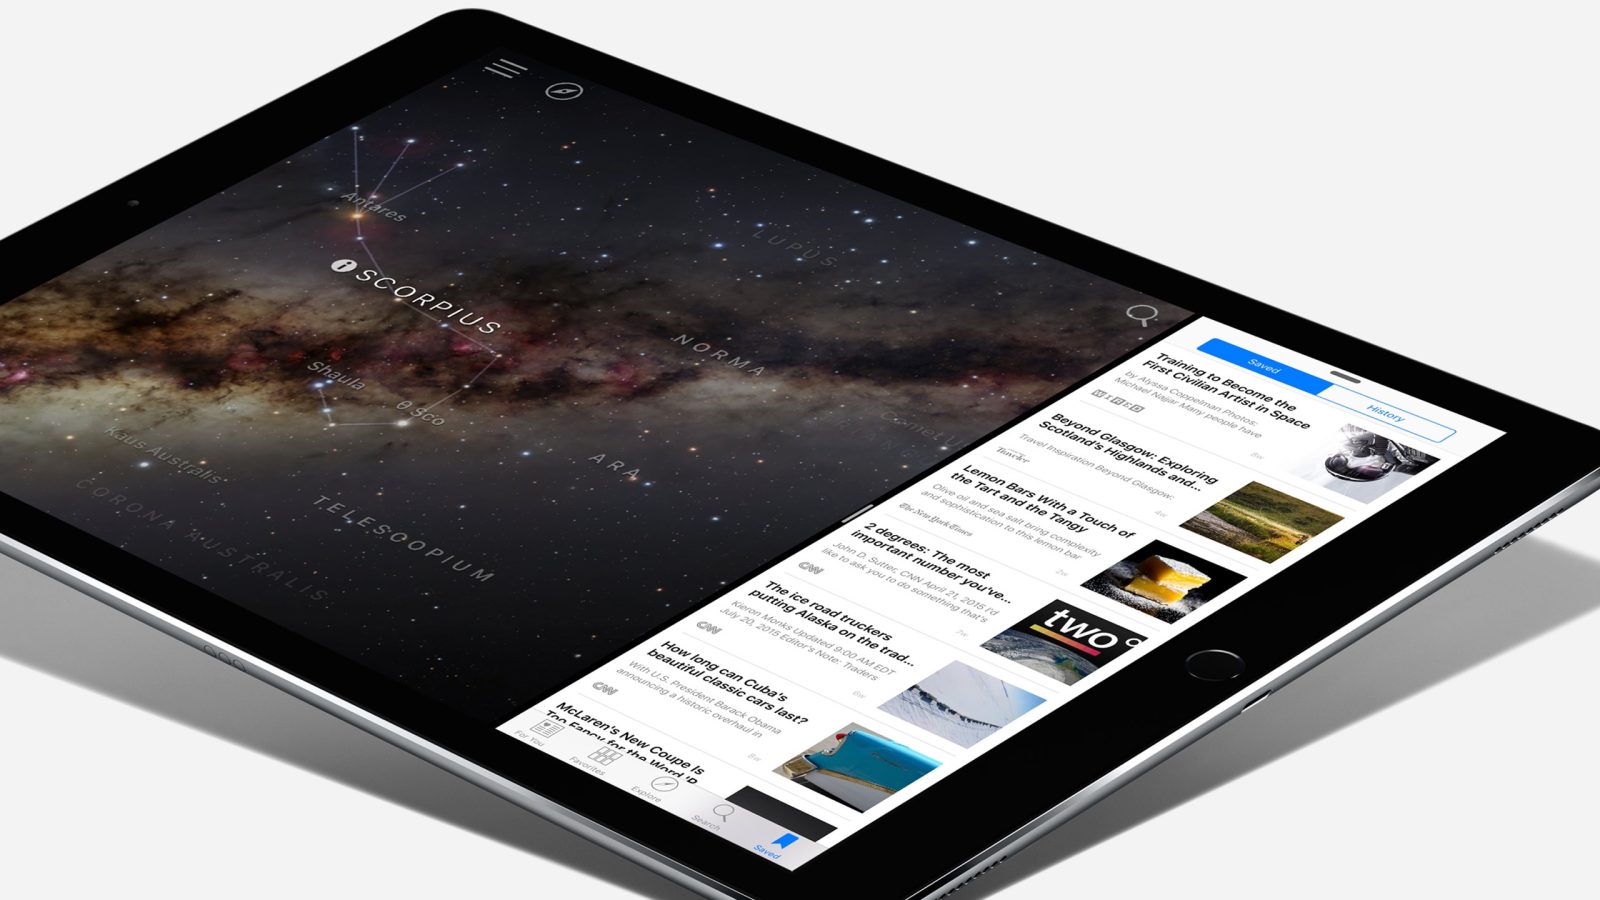 Where to buy Apple's new, larger iPad Pro this week 9to5Mac